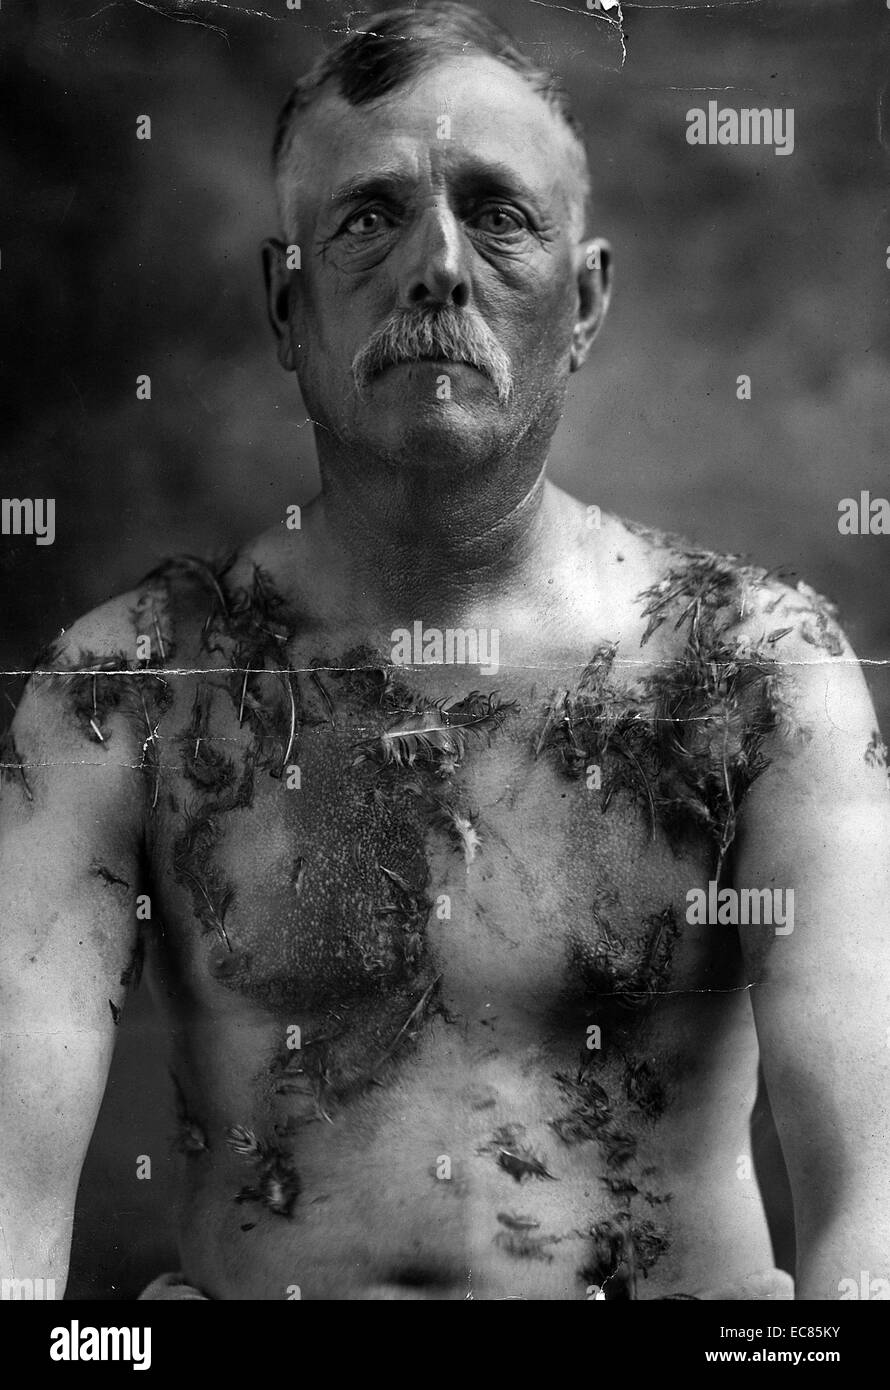 Photograph of John Meints, a German-American farmer who suffered these injuries during World War I. John Meints was tarred and feathered in Minnesota during WW1 (ca 1917-18) for not supporting war bond drives. Dated 1920. Stock Photo